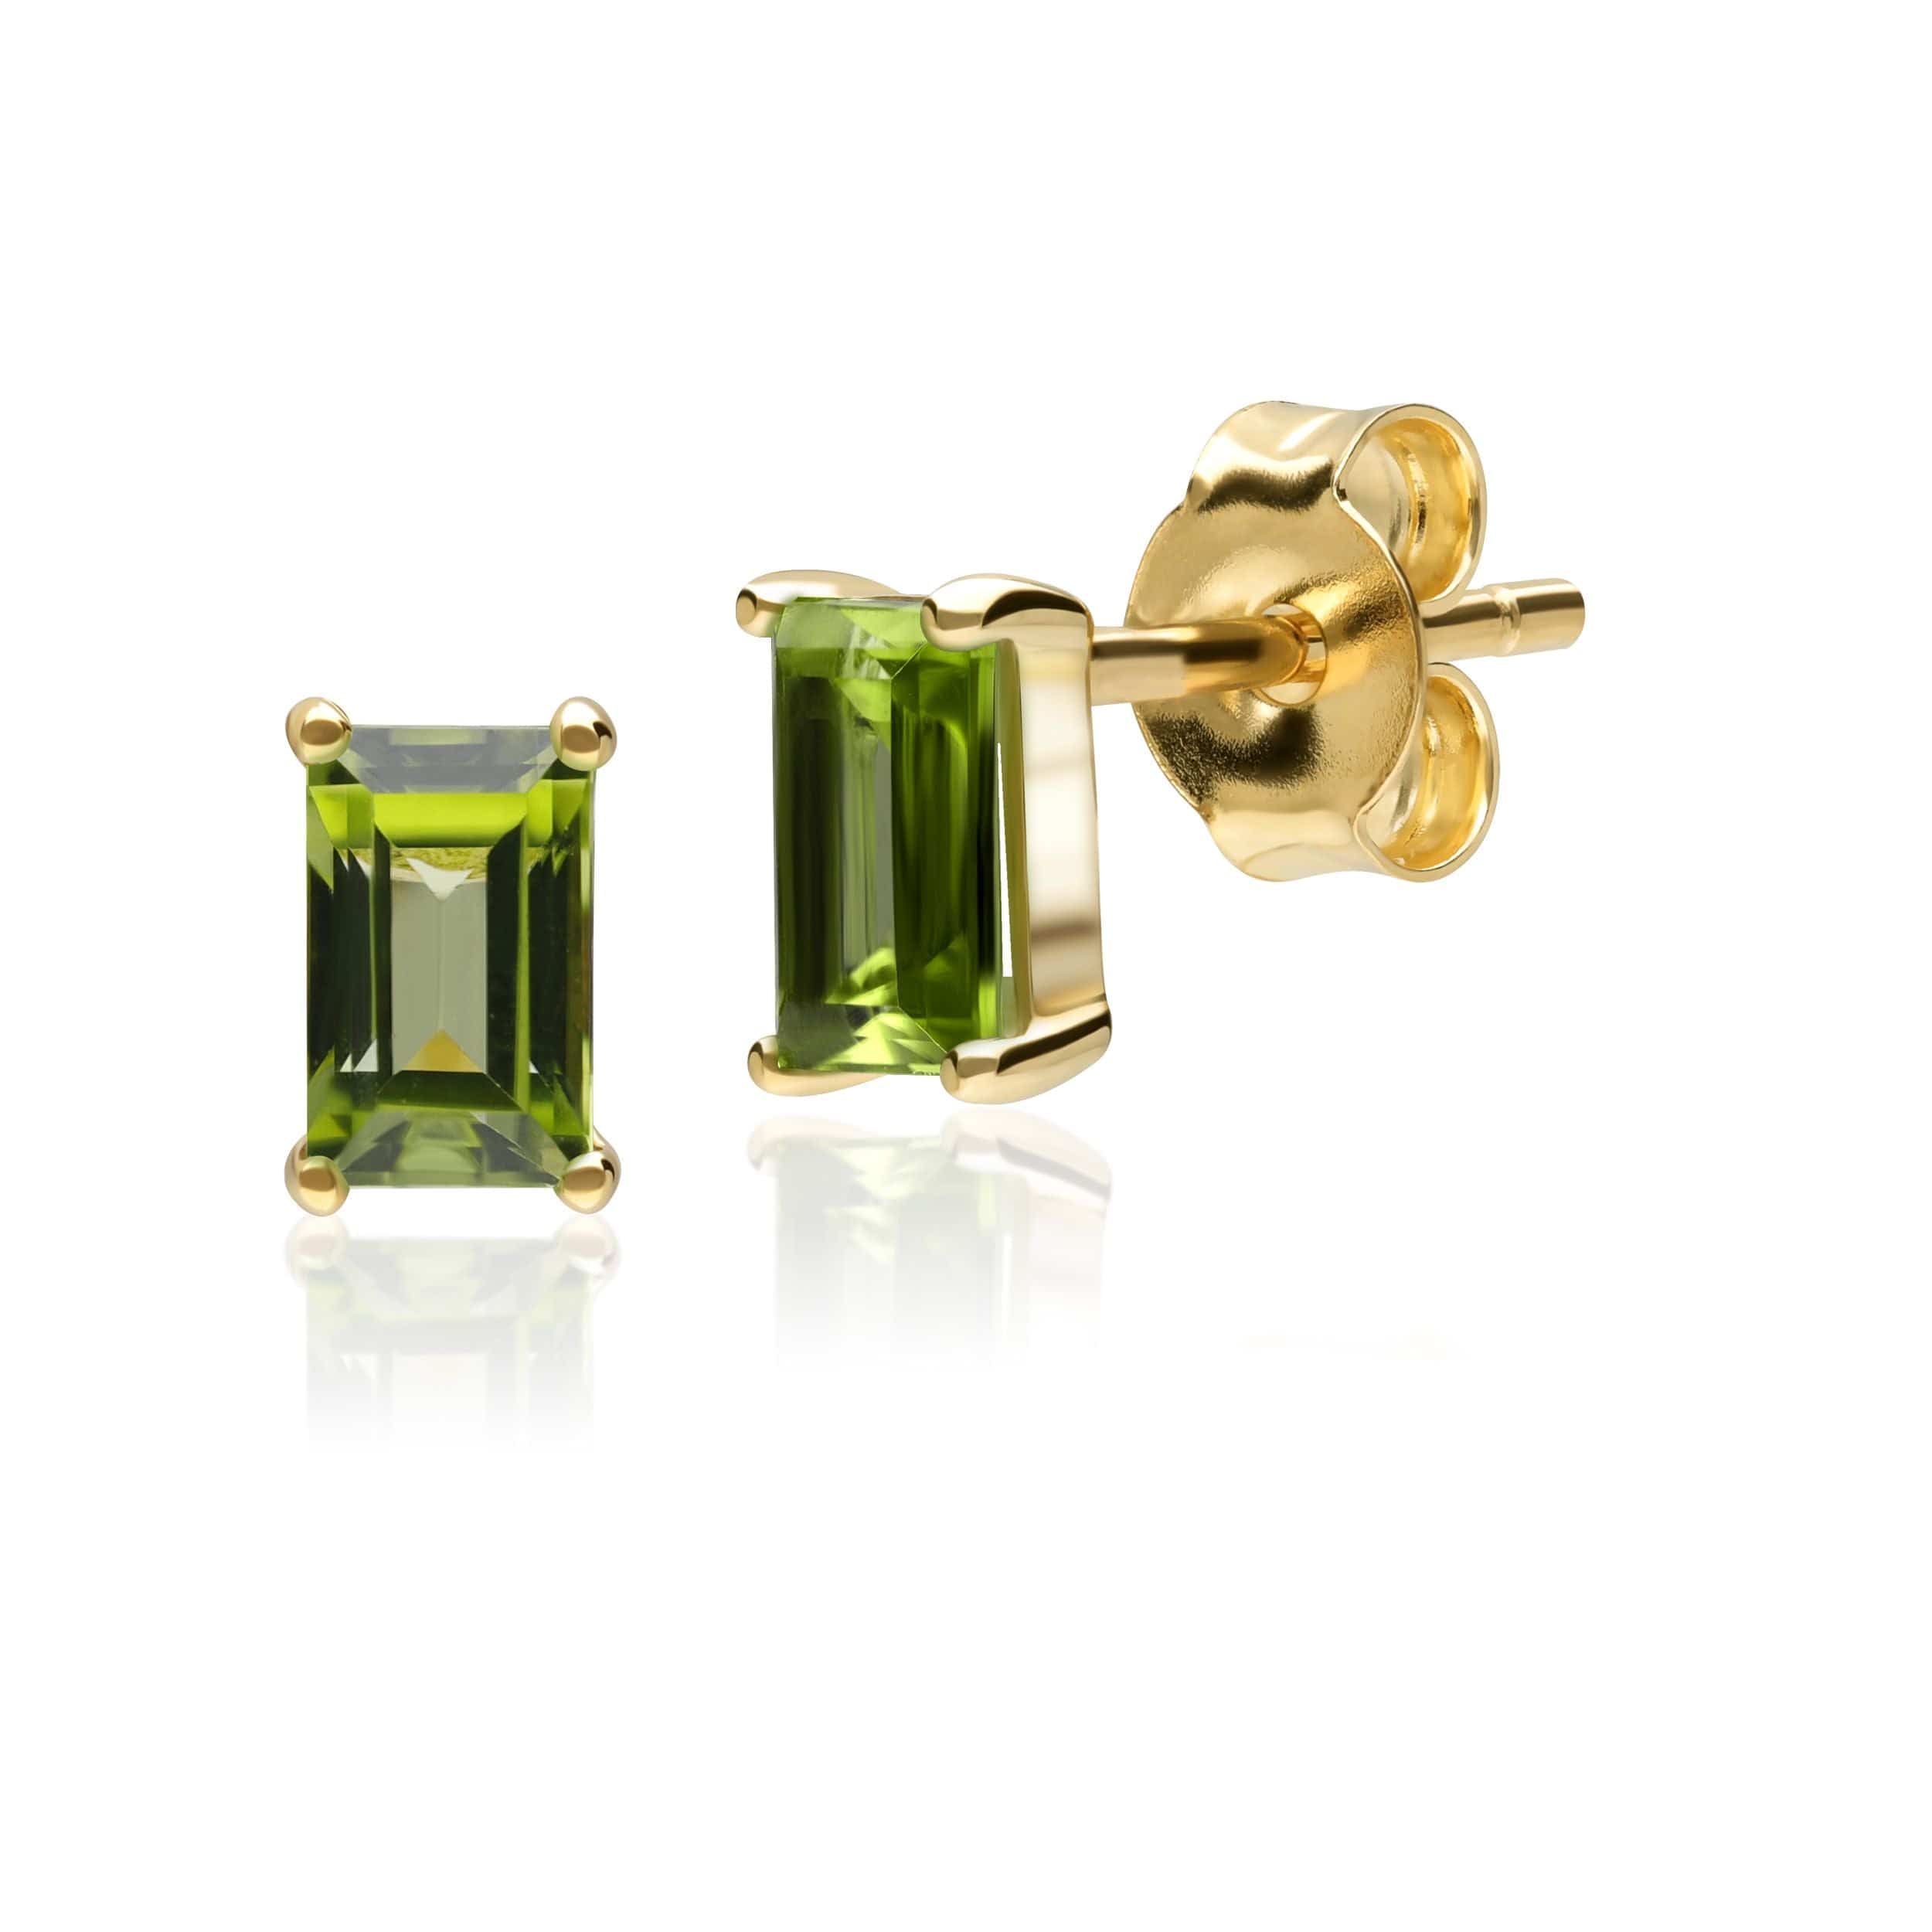 135E1524039-135P1872039 Classic Baguette Peridot Stud Earrings & Necklace Set in 9ct Yellow Gold 2